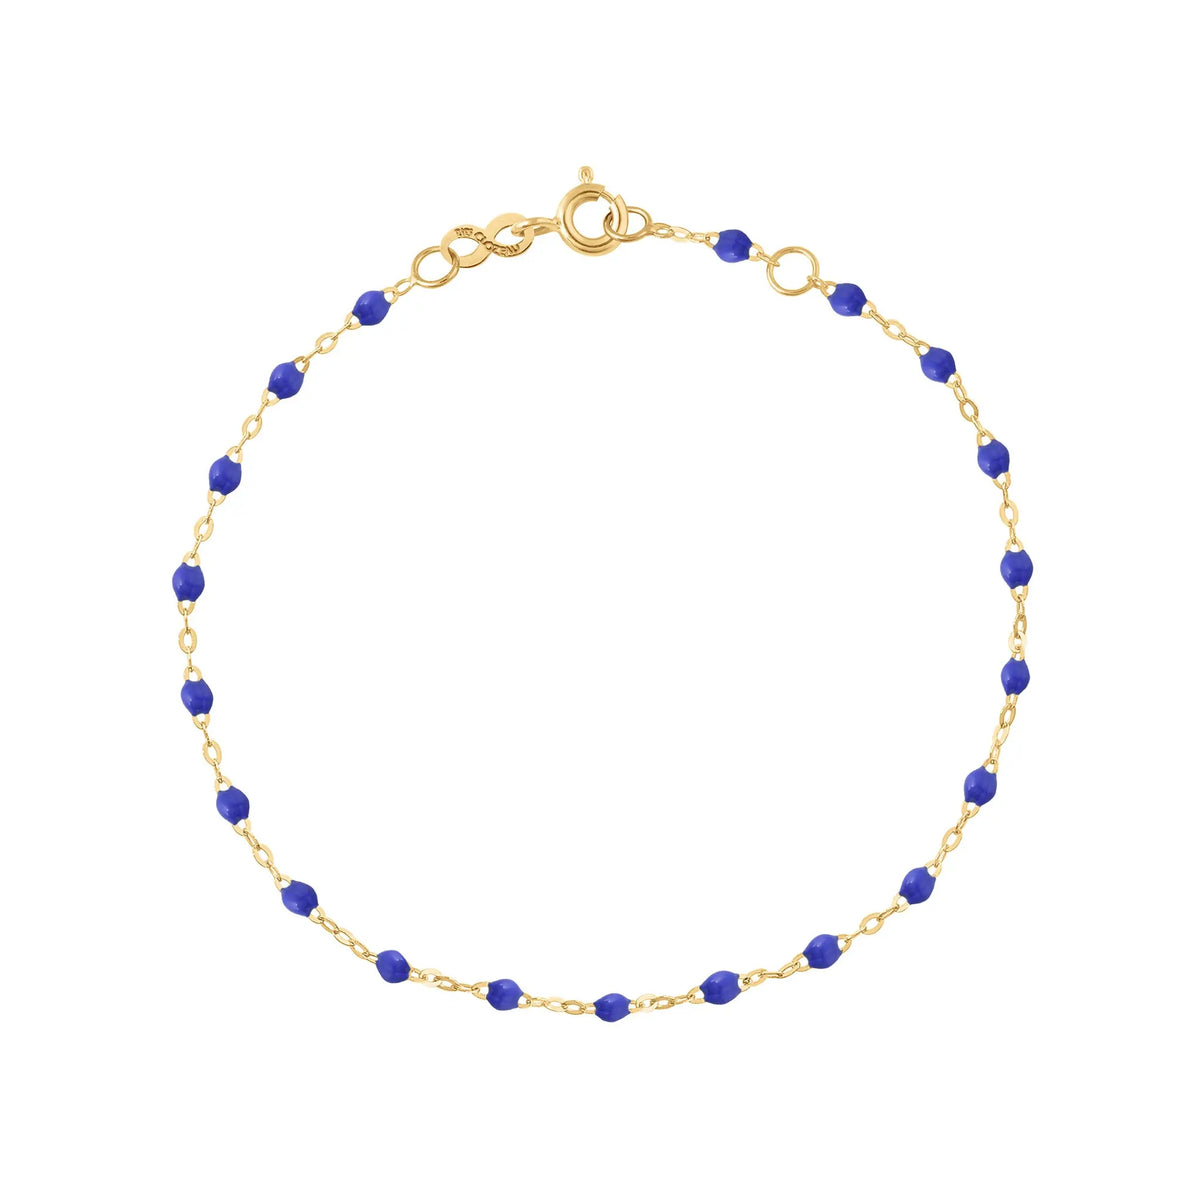 The Classic Gigi bracelet by gigi CLOZEAU features 18K Yellow Gold, and unique Bleuet jewels for a simple, everyday look.   Each jewel is unique, artisanally made in their family-owned workshop. 18K yellow gold and resin. The bracelet measures 6.7 inches with adjustable clasp at 6.3 inches.